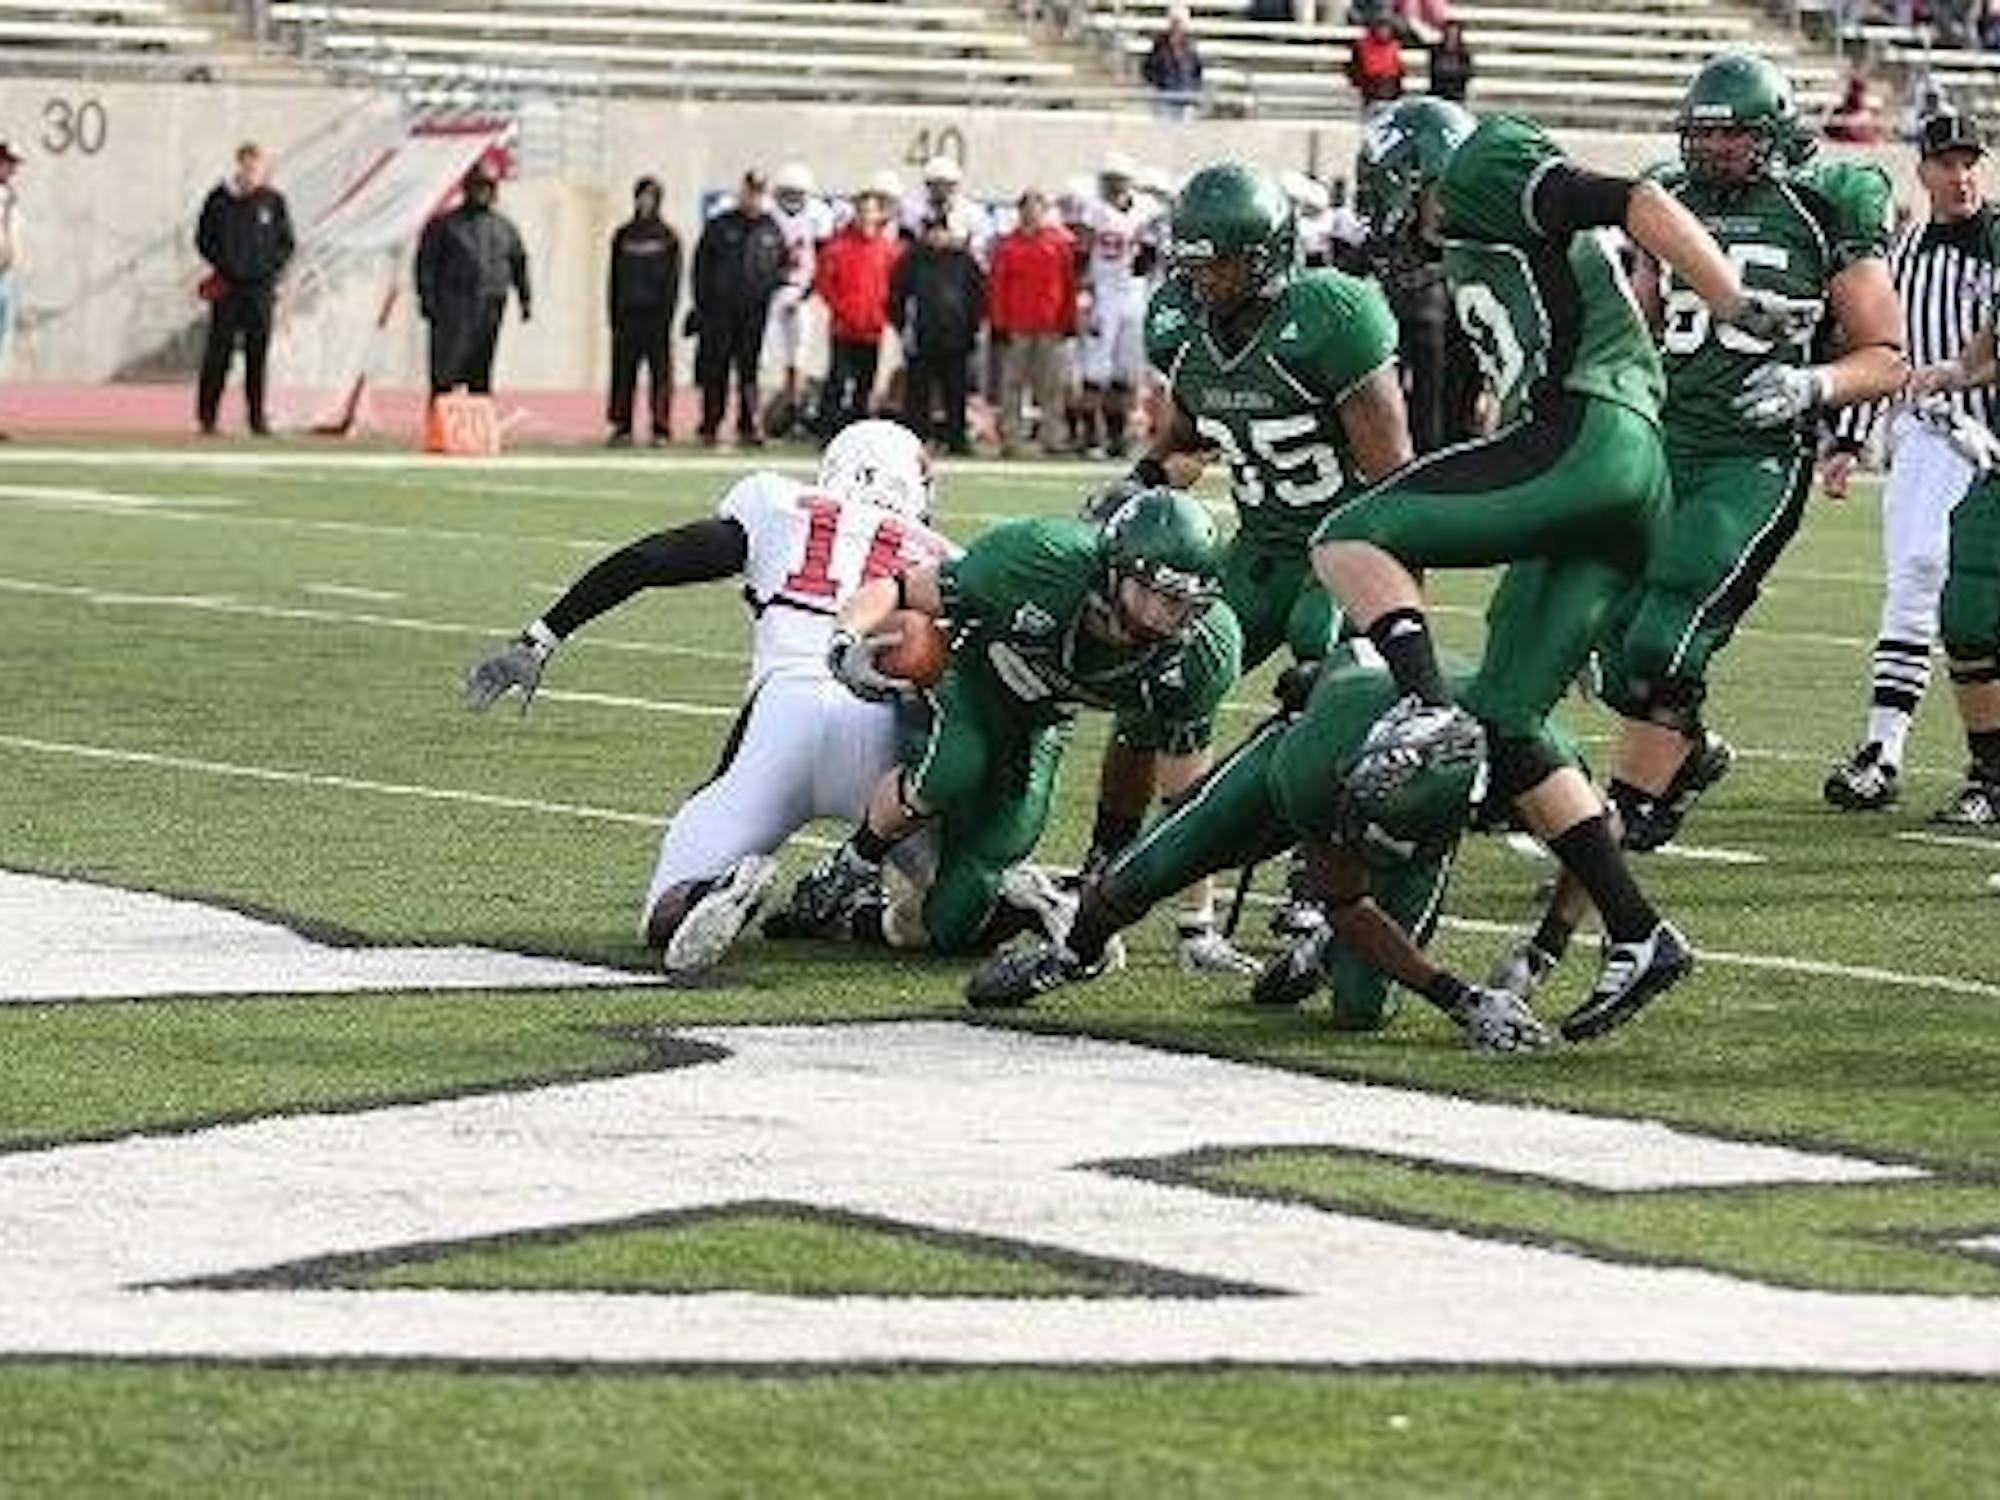 Corey Welch rushes for a 12-yard touchdown in the second quarter at Rynearson Stadium.